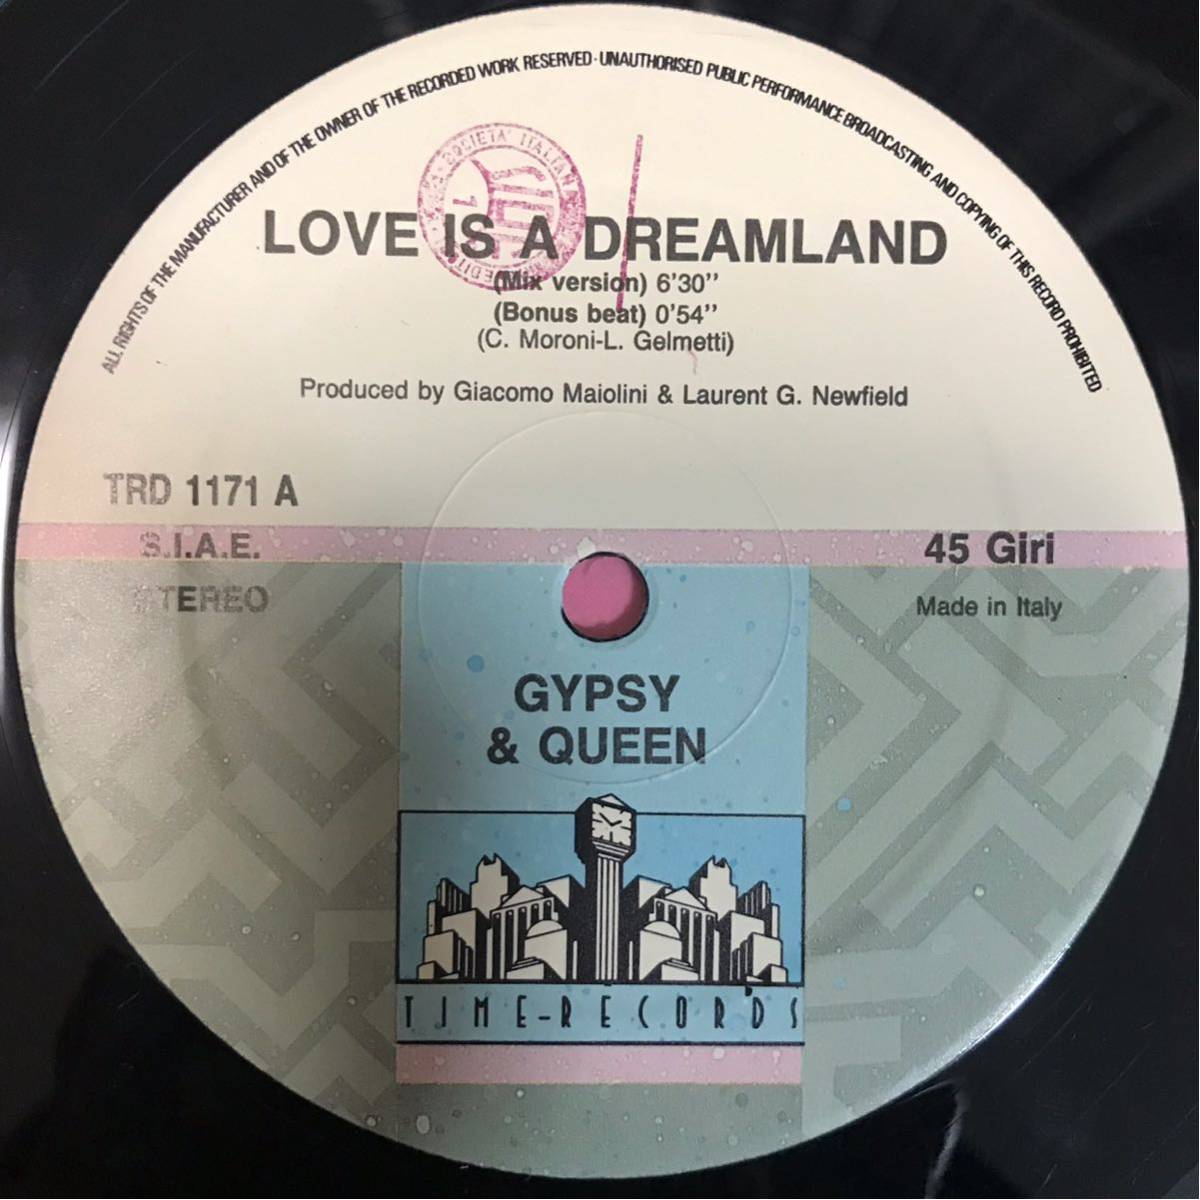 【12inch】GIPSY & QUEEN - LOVE IS A DREAMLAND / ユーロビート / ハイエナジーの画像3